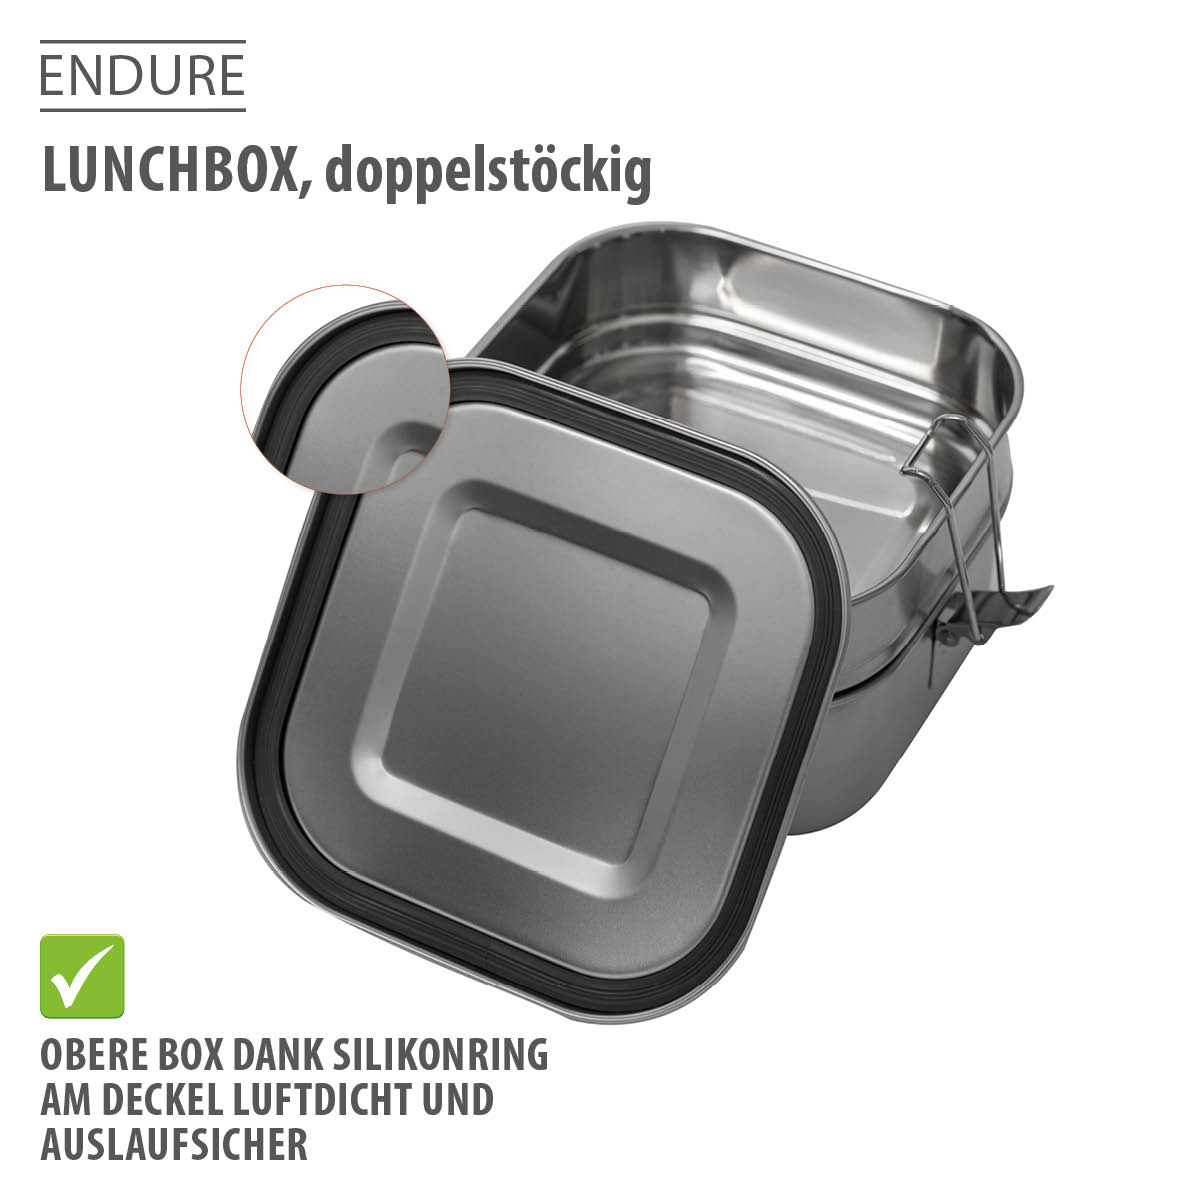 Lunch box ENDURE, stacked two-high